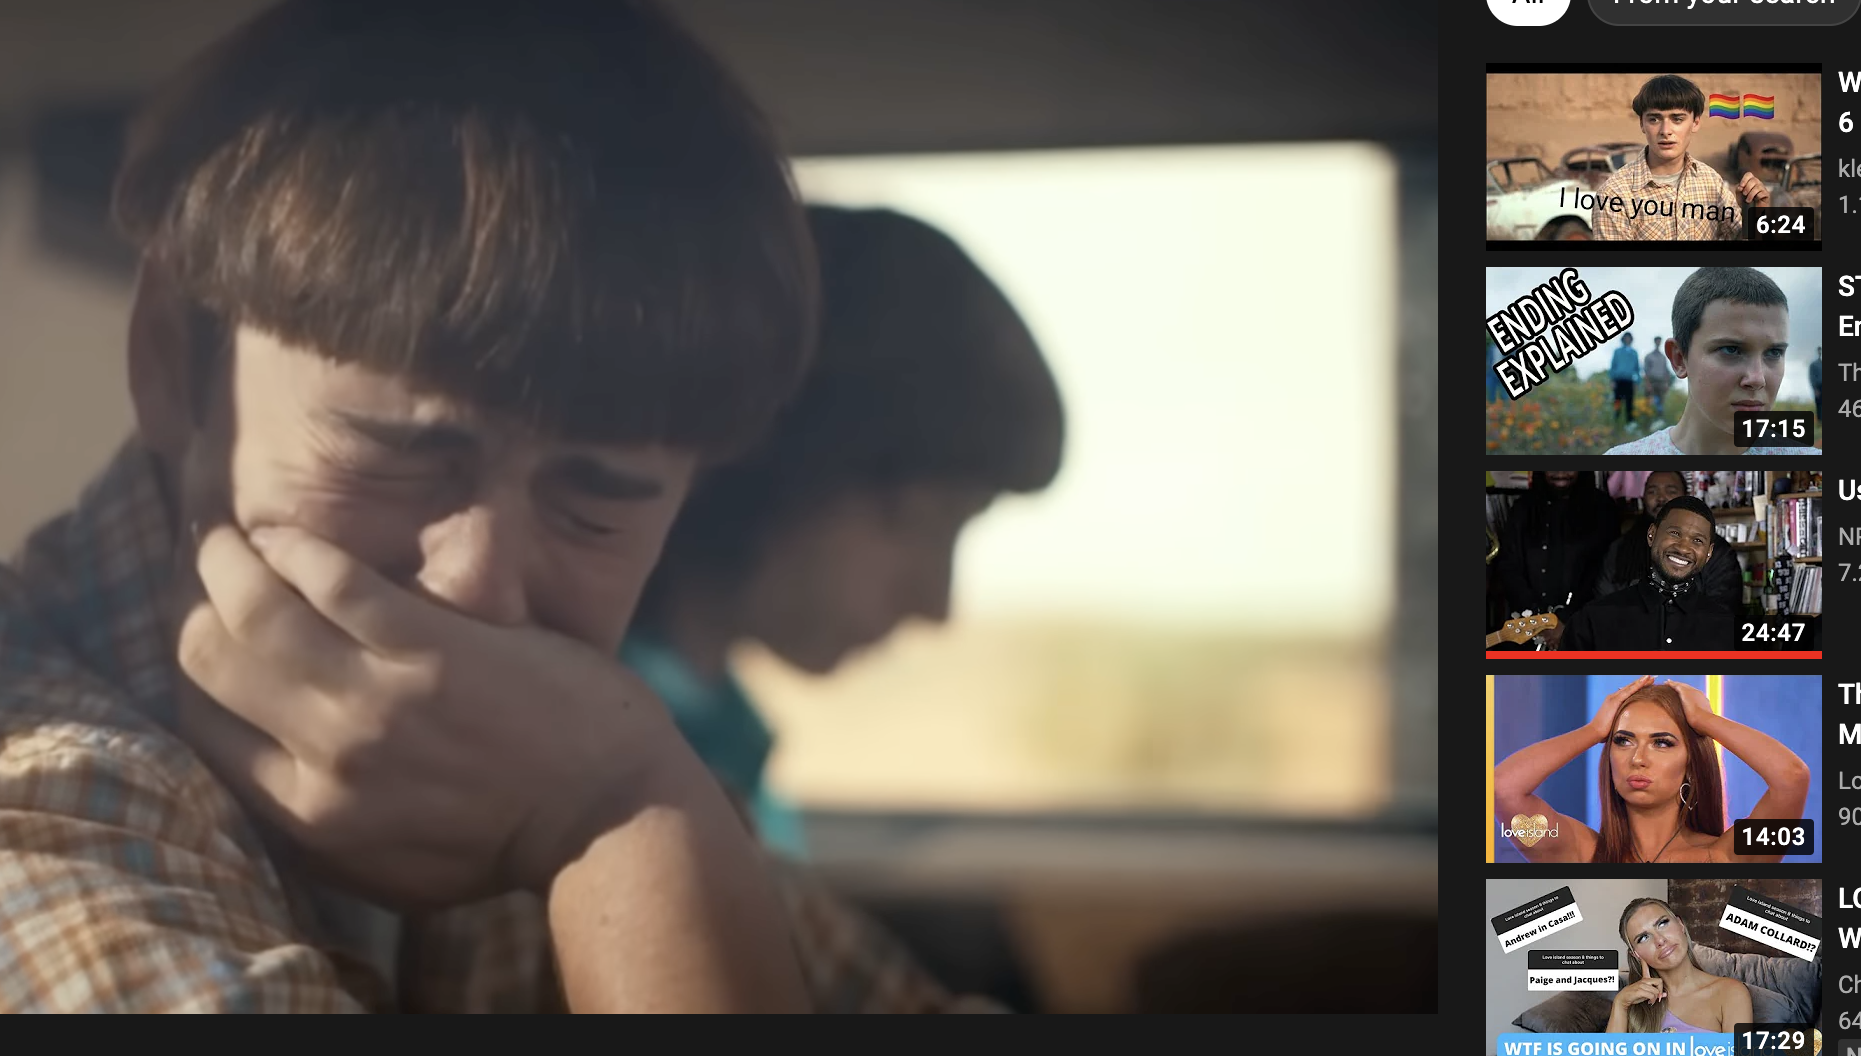 Stranger Things: Will Byers gay? Noah Schnapp says yes - GoldDerby